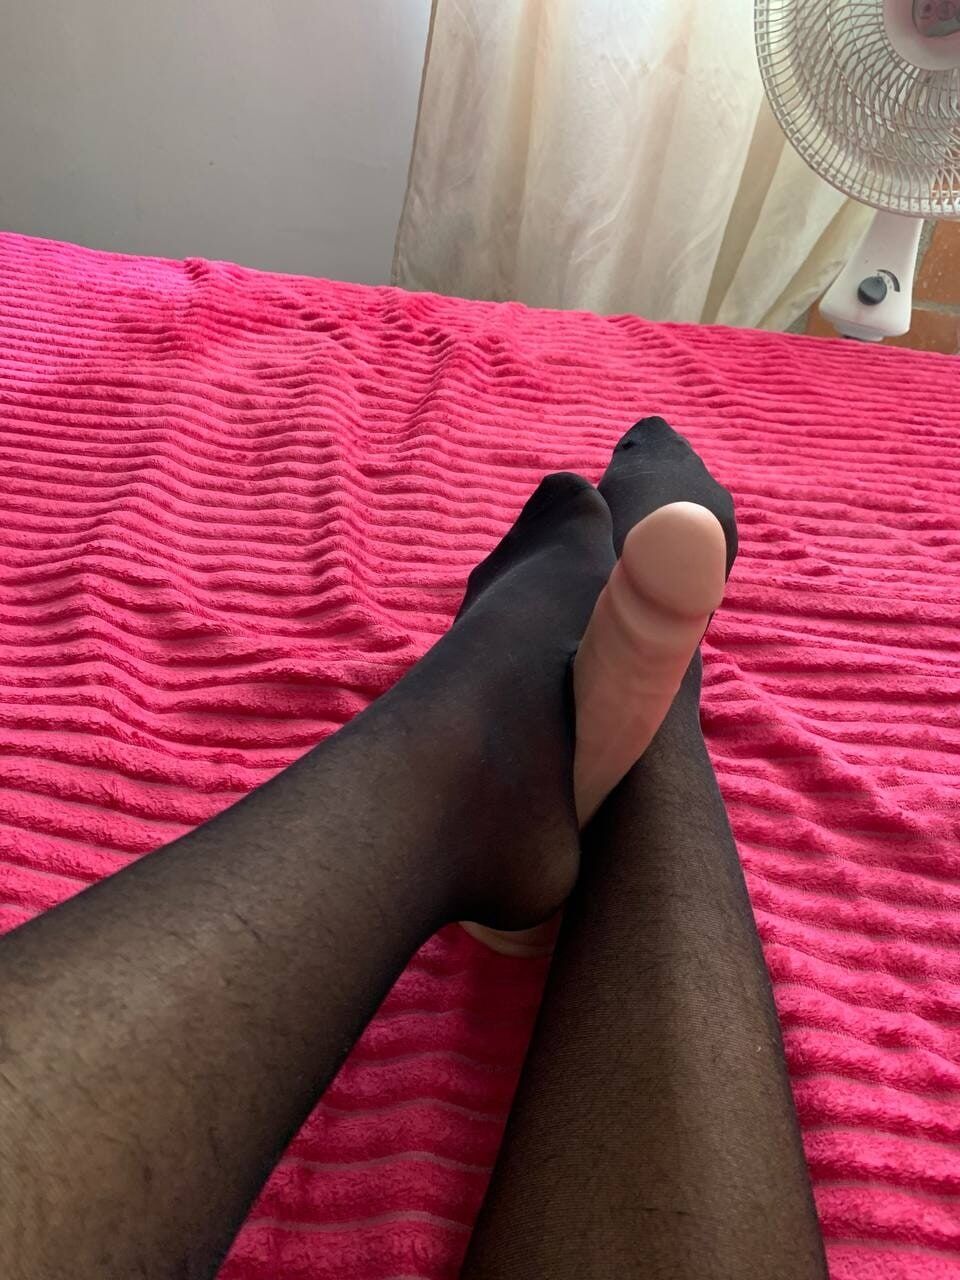 I want you to eat my beautiful feet  #8